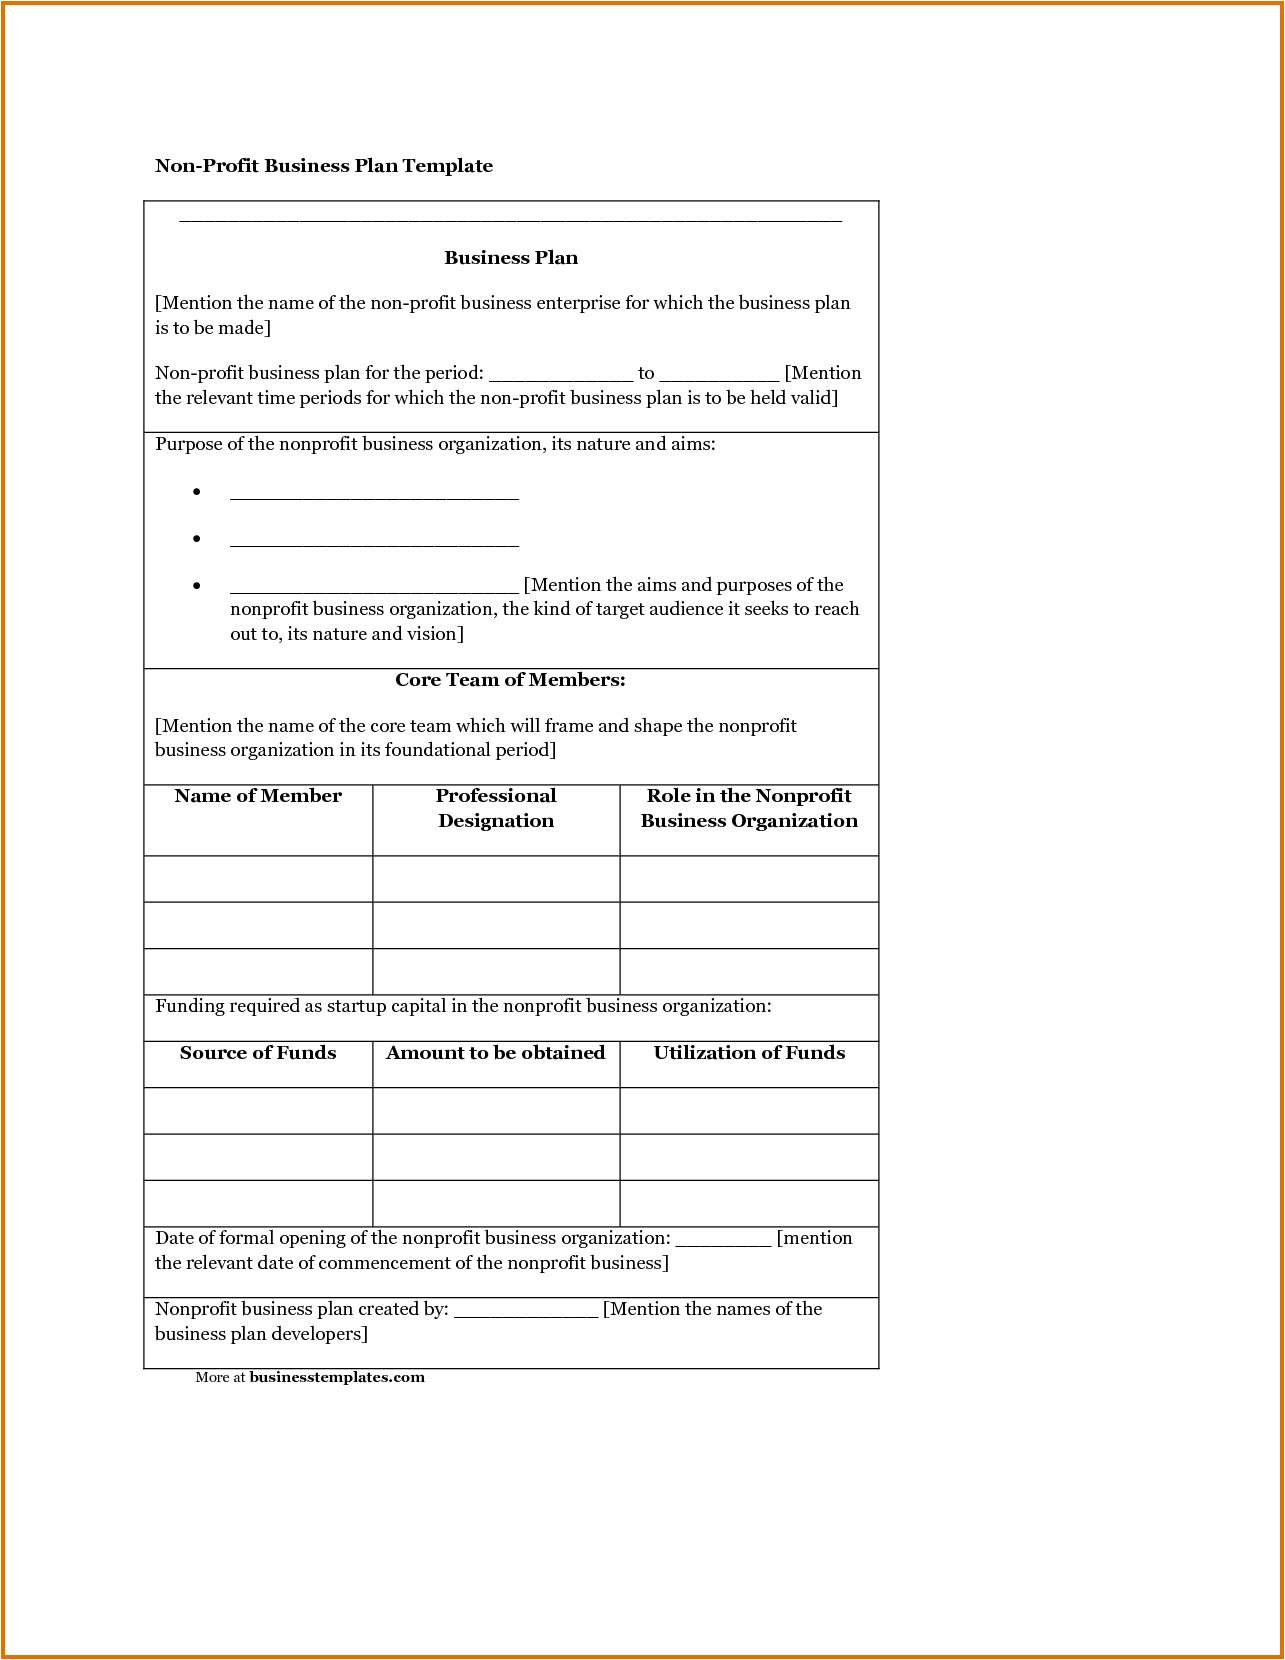 Not for Profit Business Plan Template williamsonga.us